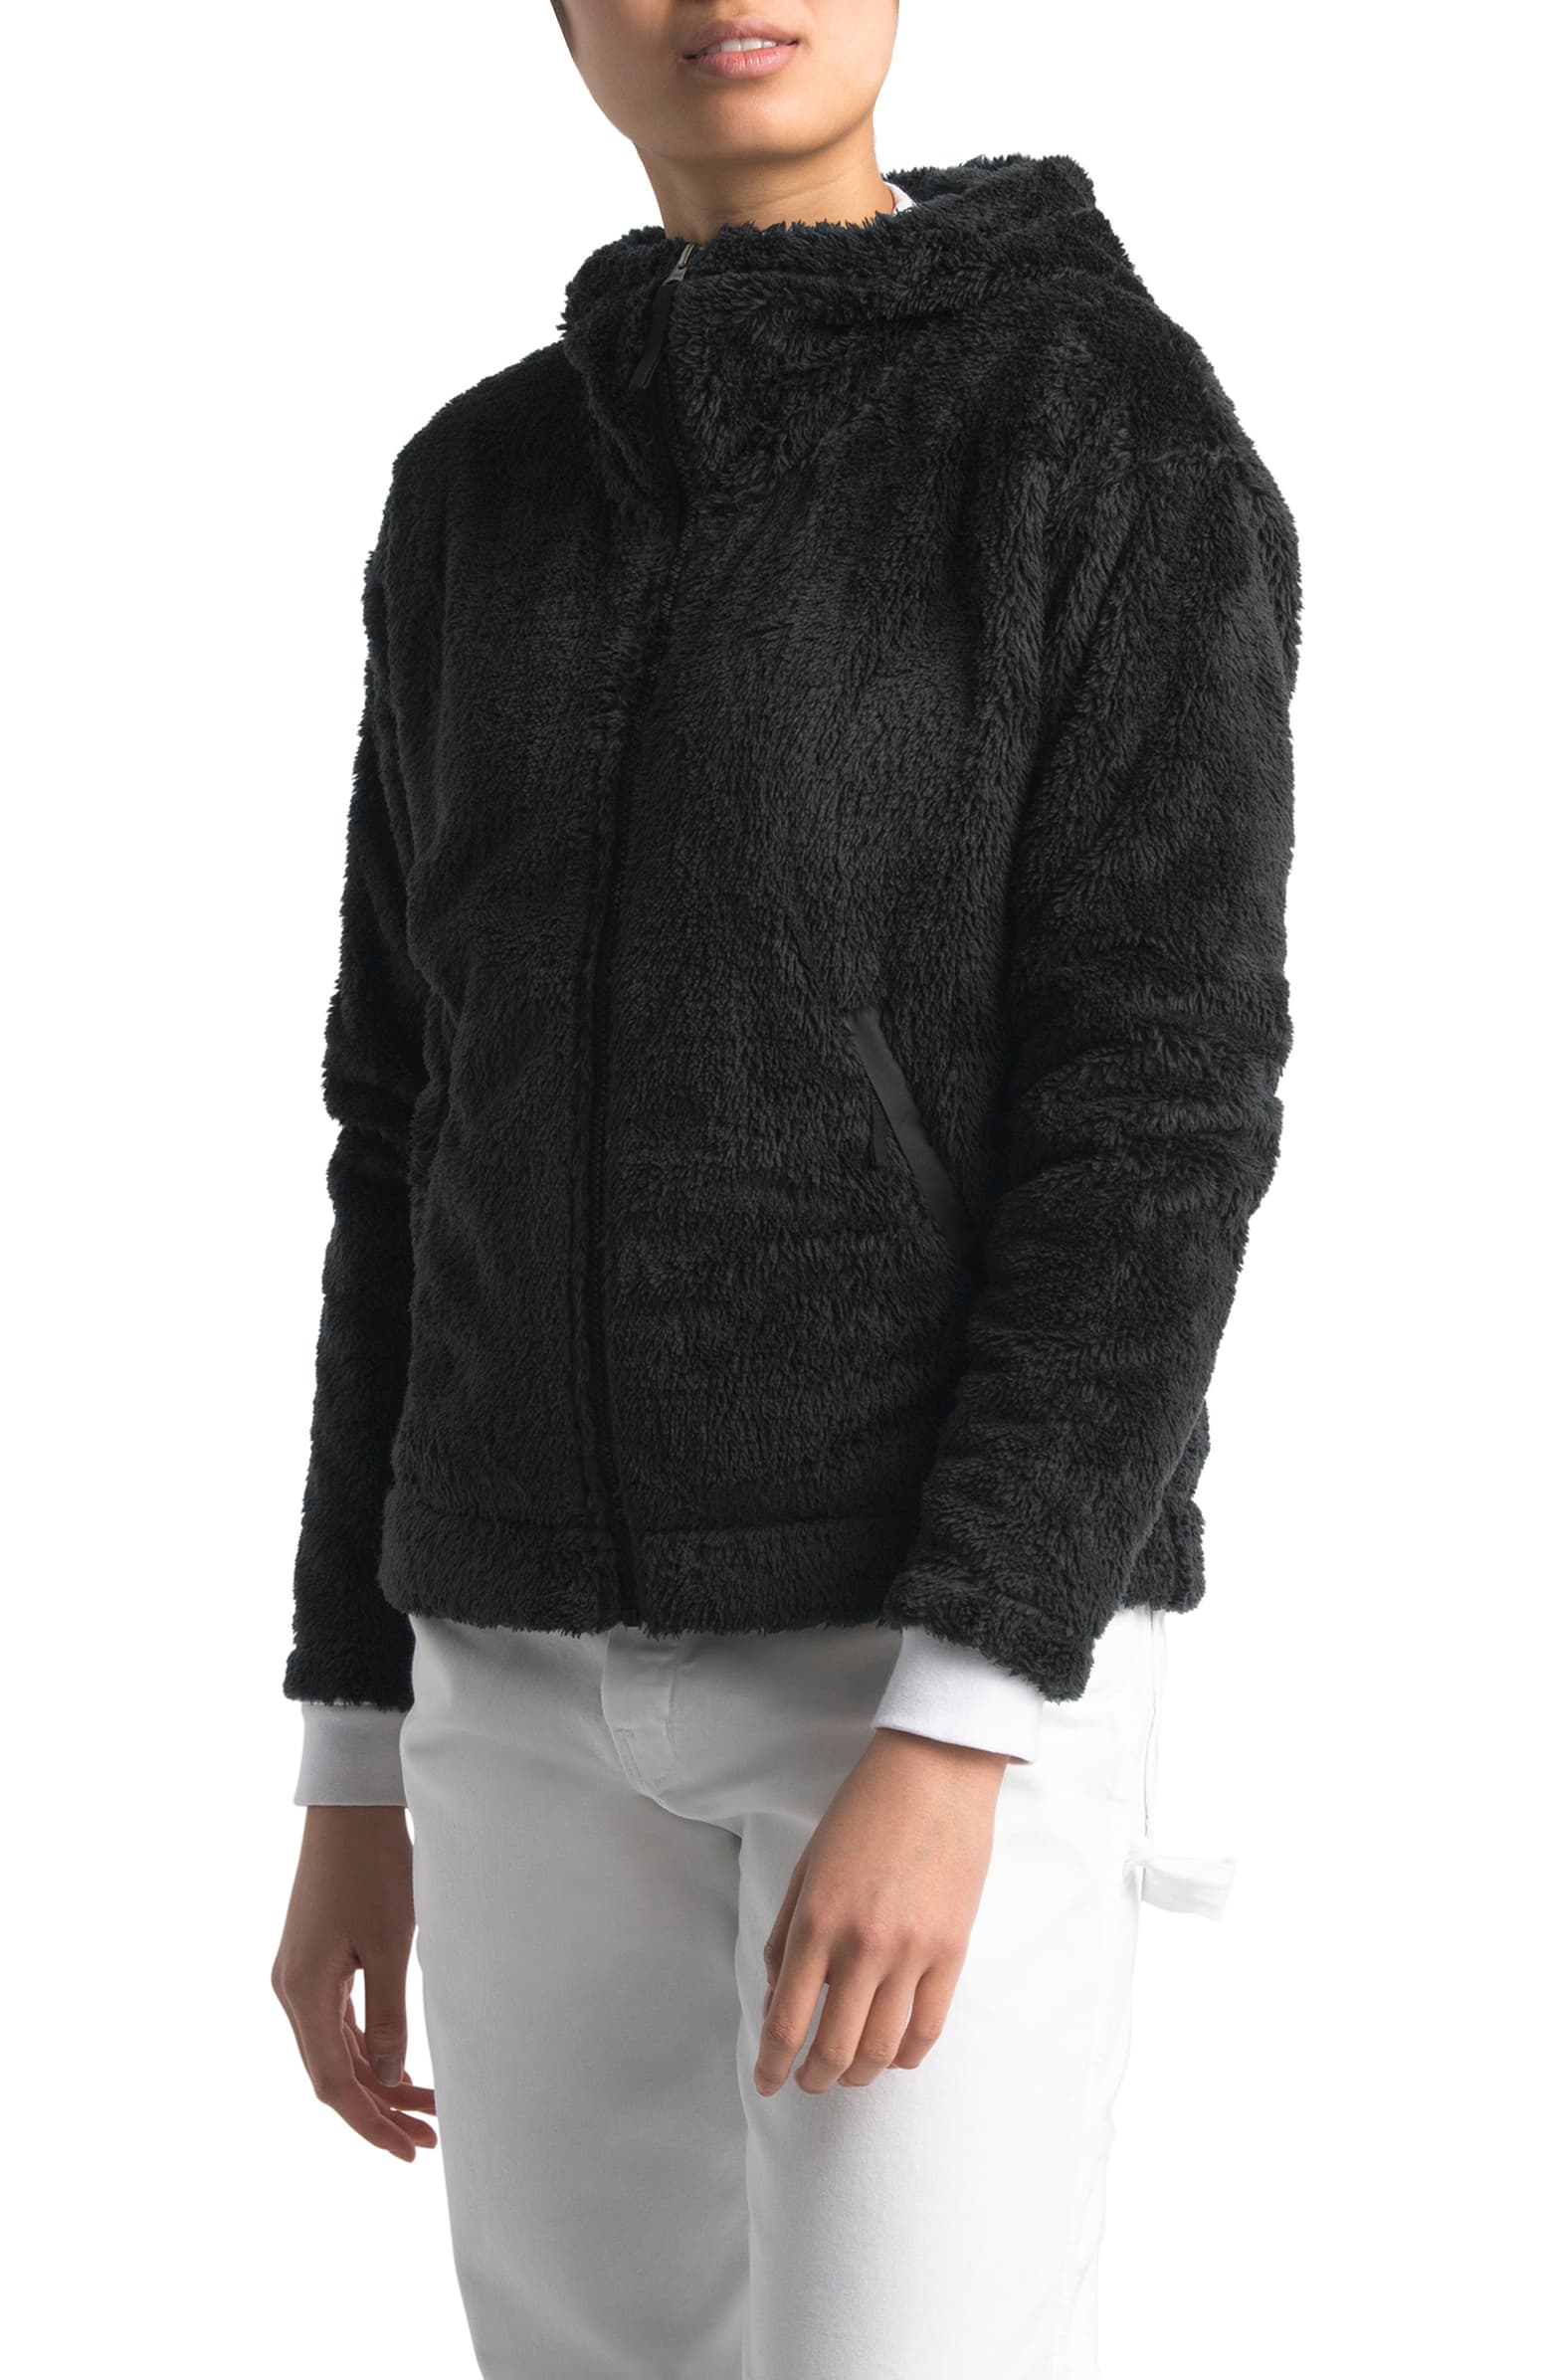 The North Face Furry Fleece Hooded Jacket